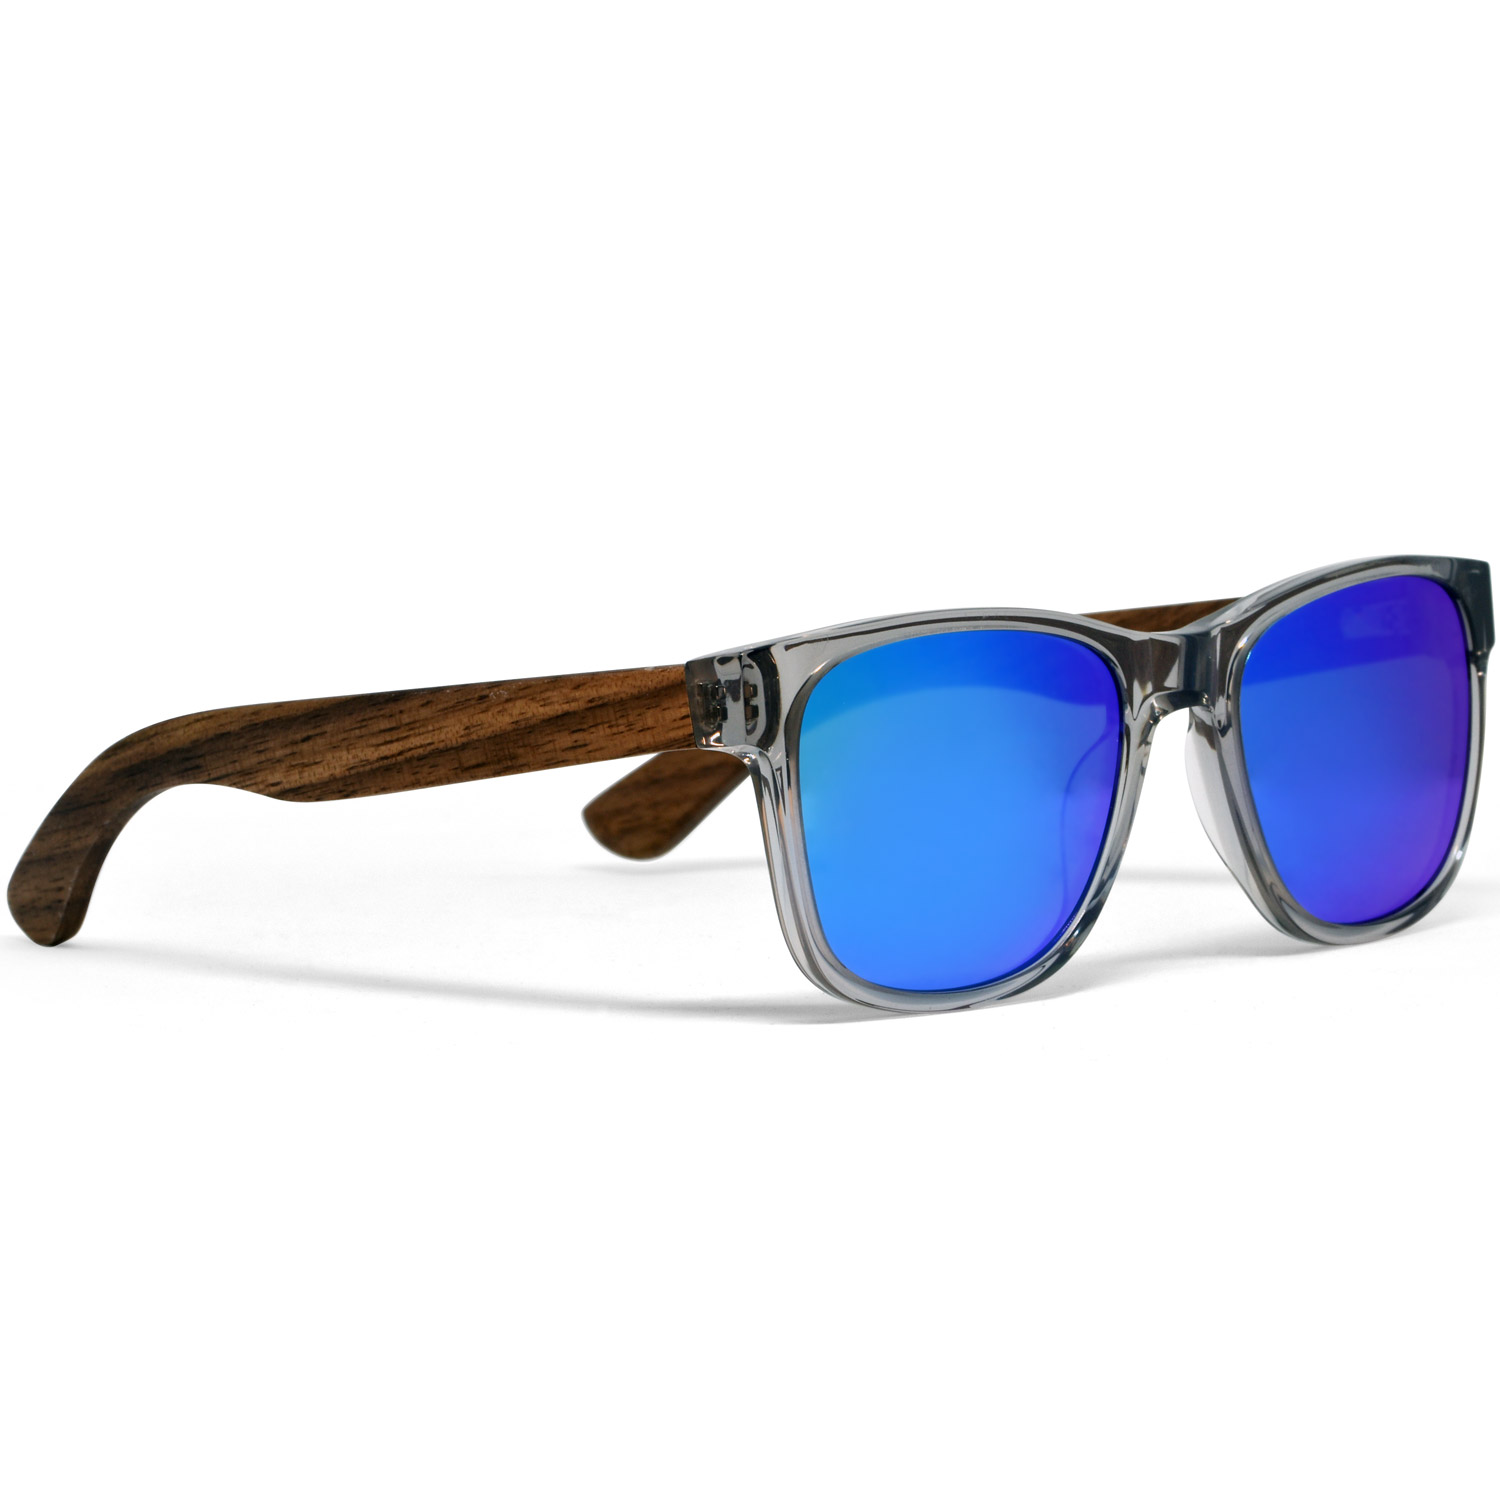 Walnut wood sunglasses classic style transparent frame with blue lenses right